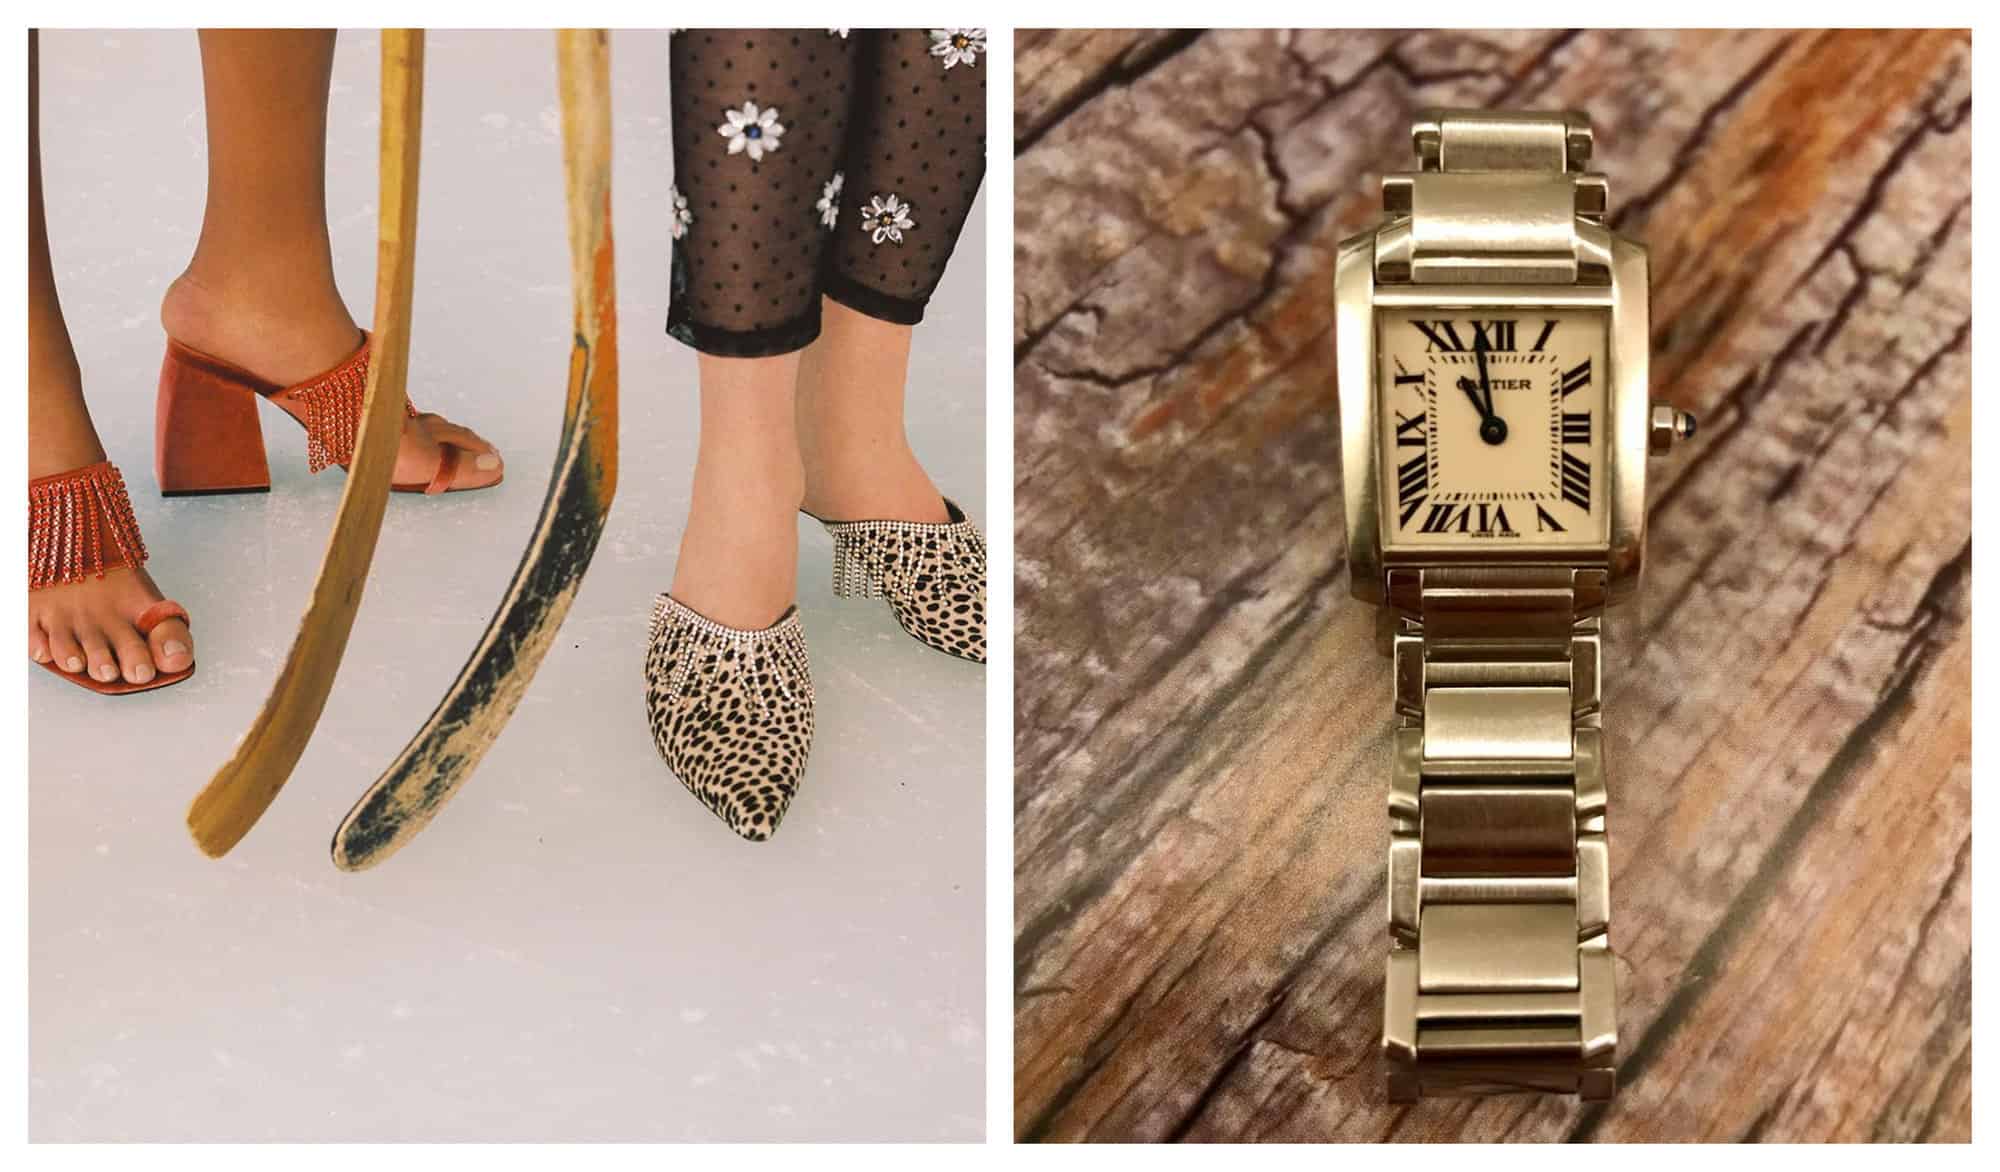 Left: 2 feet wearing 2 sets of shoes. The one of the left is wearing orange sandals while the one on the left is wearing leopard print mules. Right: A picture of a vintage golden Cartier watch.